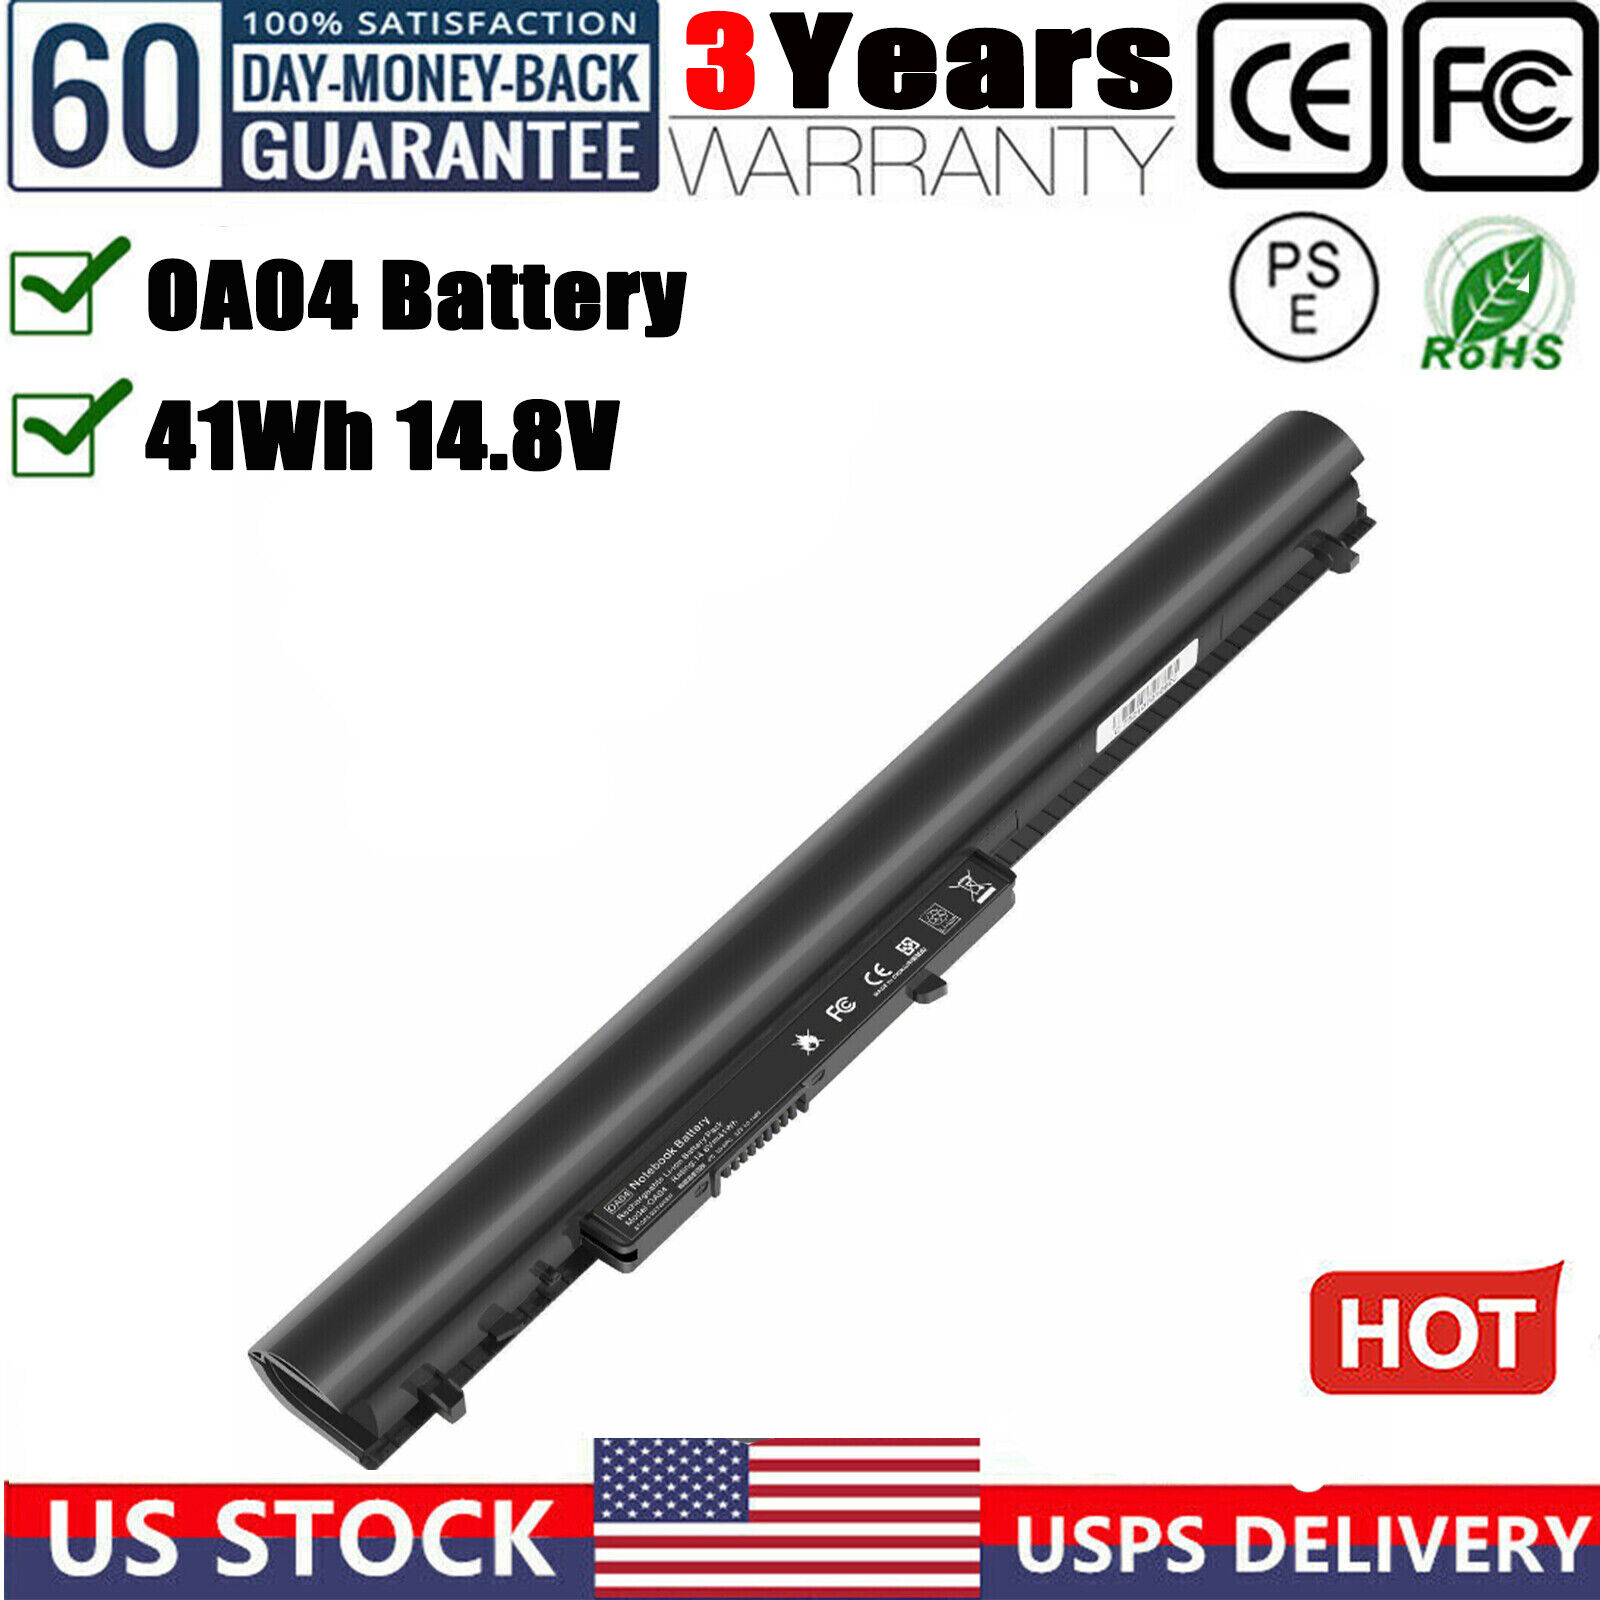 ✅NEW SPARE 746641-001 BATTERY FOR HP OA03 OA04 740715-001 746458-421 NOTEBOOK US